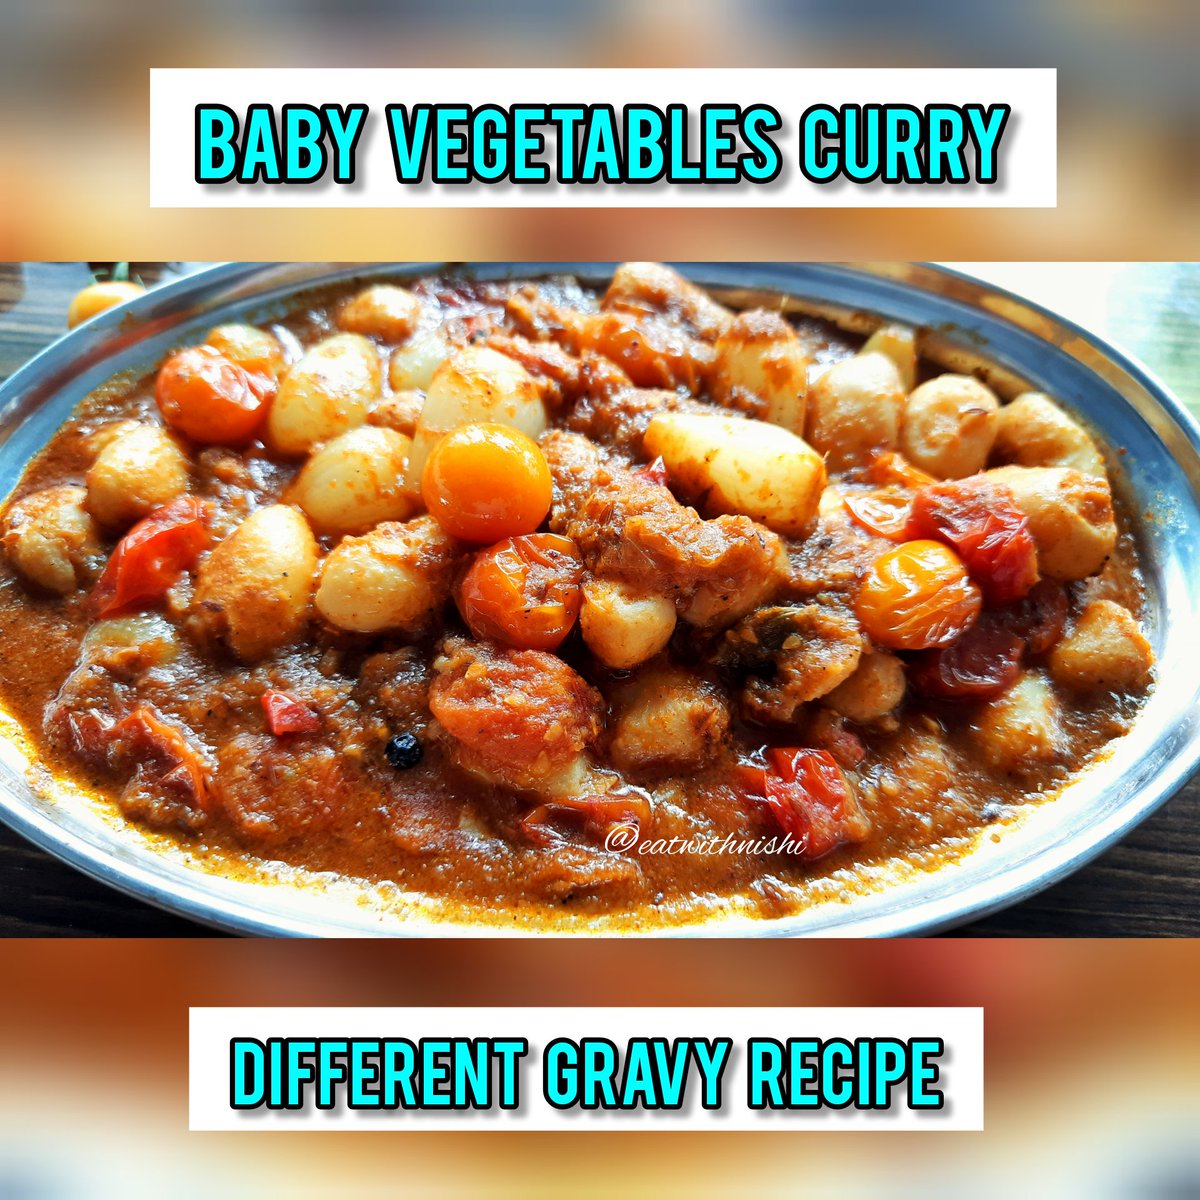 Baby Vegetables Curry / Different style vegetable gravy. Recipe video link given below 👇
youtu.be/gOTZ2zxaGCo

#eatwithnishi #babyvegetablescurry 
#vegetablecurry #curryrecipe #masalacurry #cherrytomatocurry #onioncurry  #indiancurry #currymasala 
#AlooBhaji  #HalwaiPoori